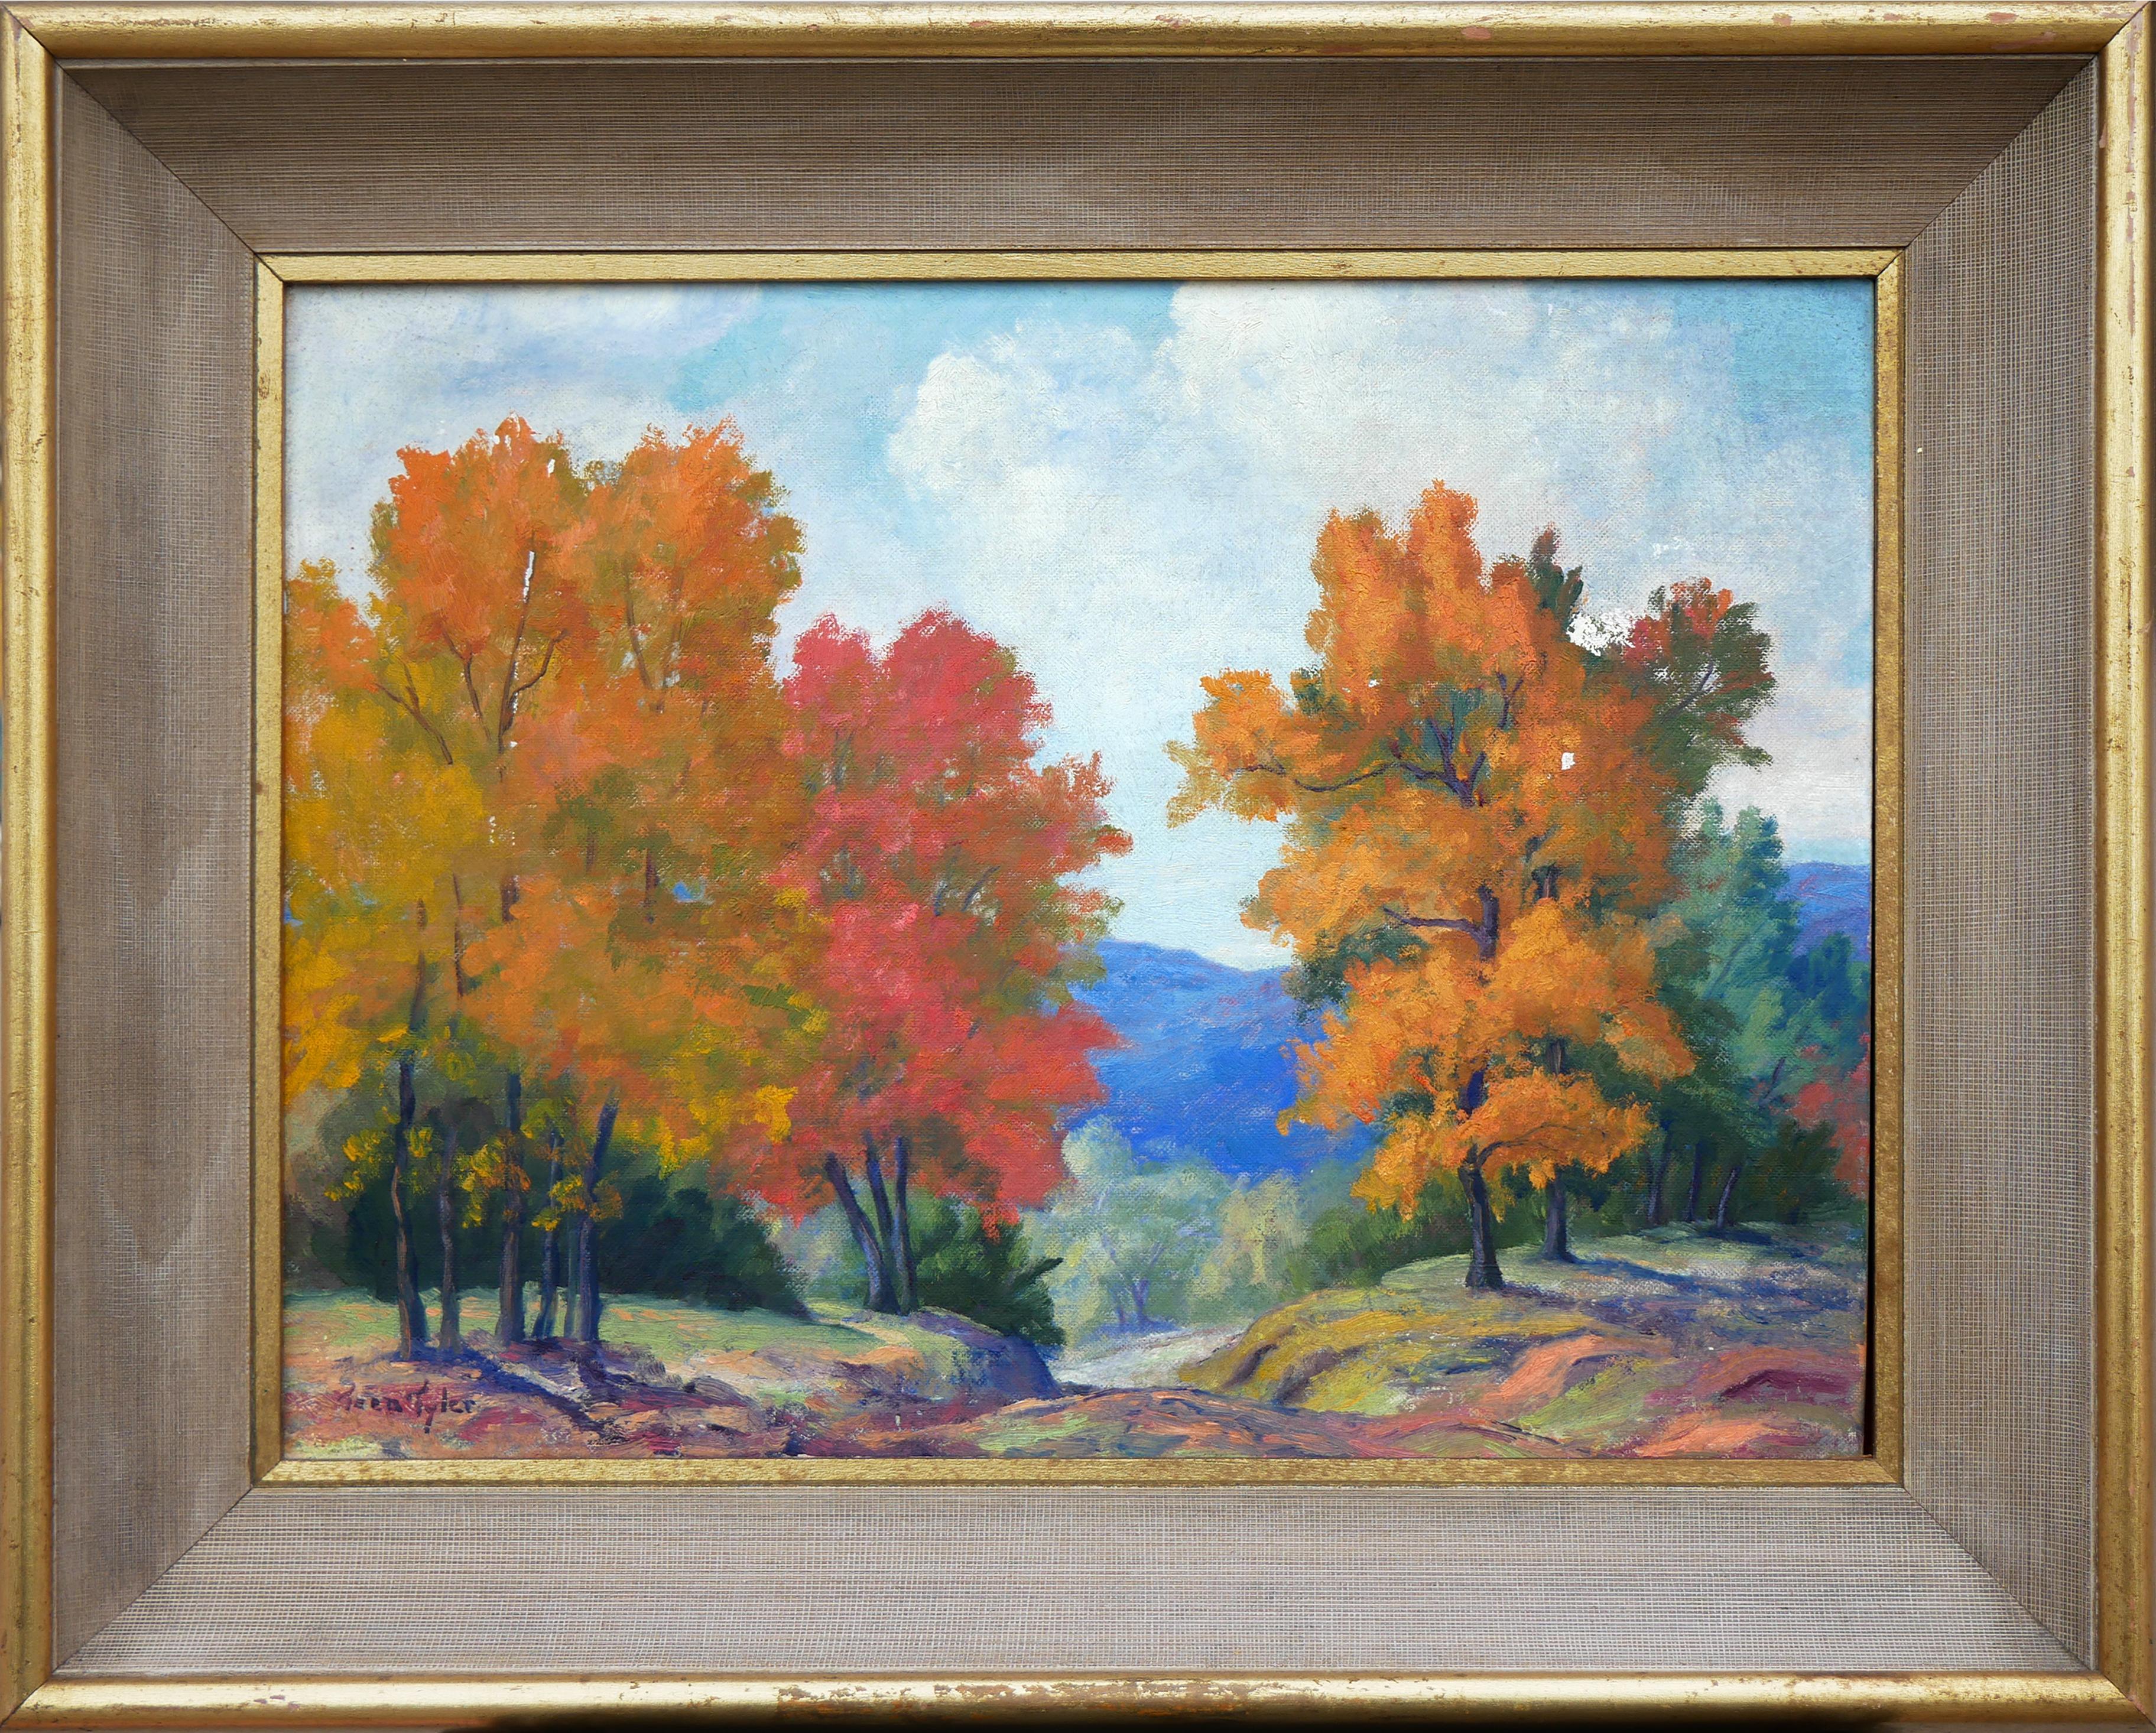 Blue and orange-toned abstract impressionist painting by artist Teen Tyler. The painting depicts a fall scene at The Maple Grove Farm in North Pomfret, South Royalton, VT. Signed by the artist at the lower right corner. Framed in a beautiful modern